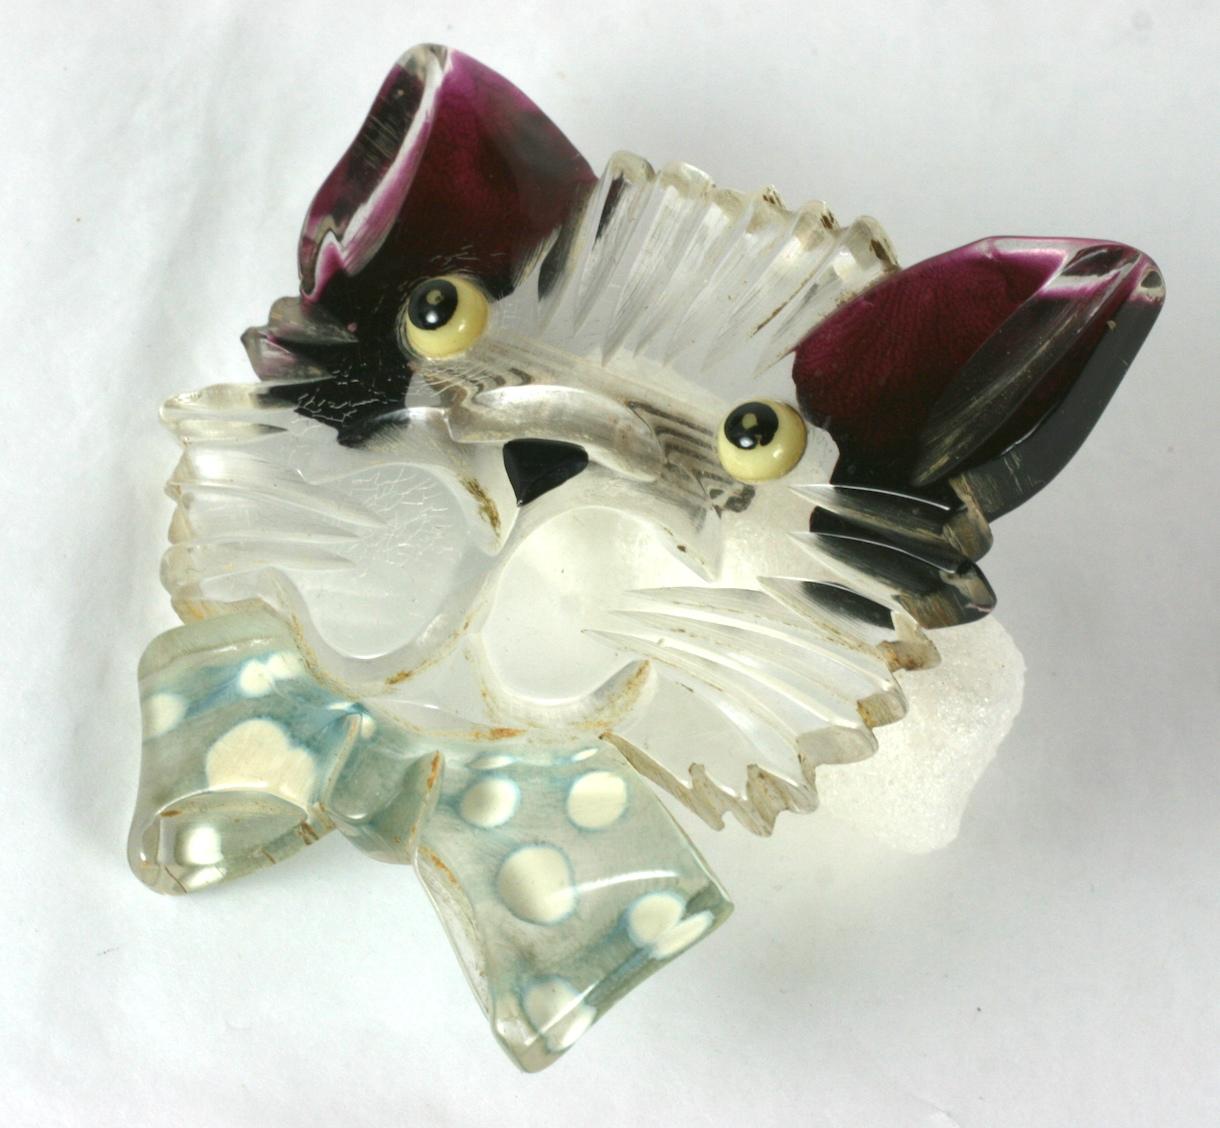 Charming Art Deco Lucite Cat Brooch from the 1930's. Cat is hand carved and reverse painted with highlights on ears and polka dot bow tie. Hand painted glass eyes. 1930's Folk Art, USA.
Excellent condition.  2.75